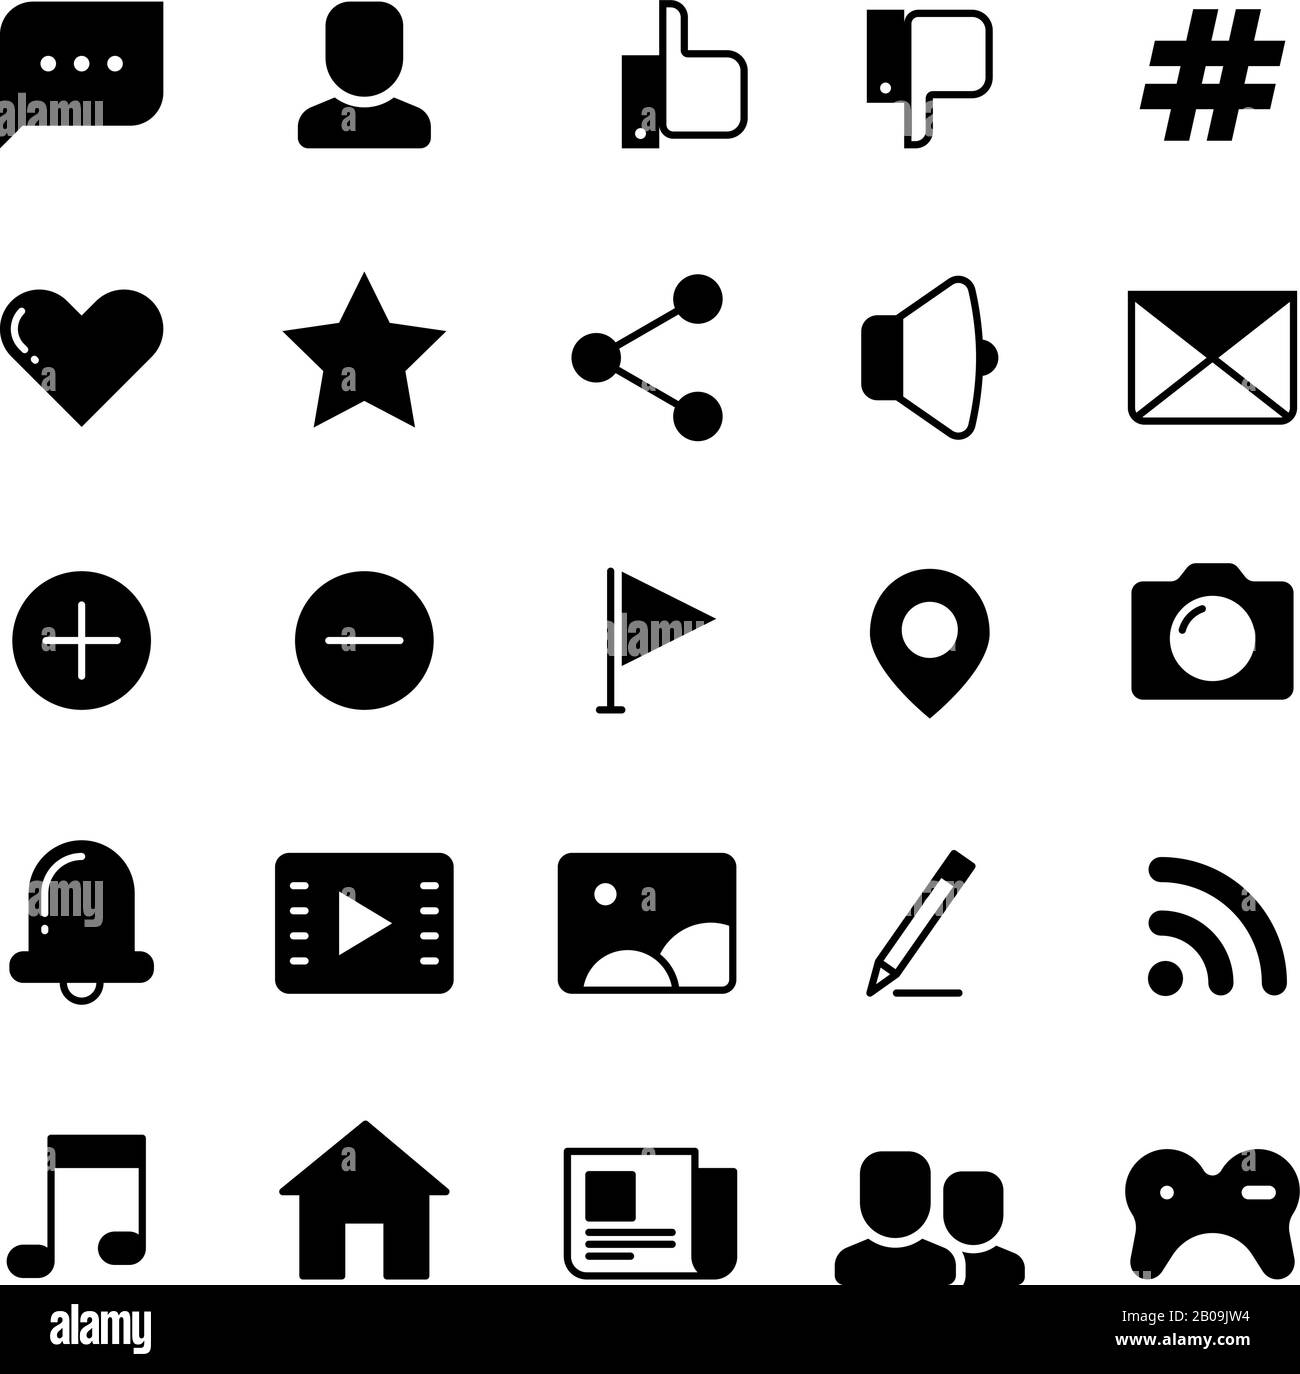 Social network vector icons set. Collection of black icons for social network interface illustration Stock Vector